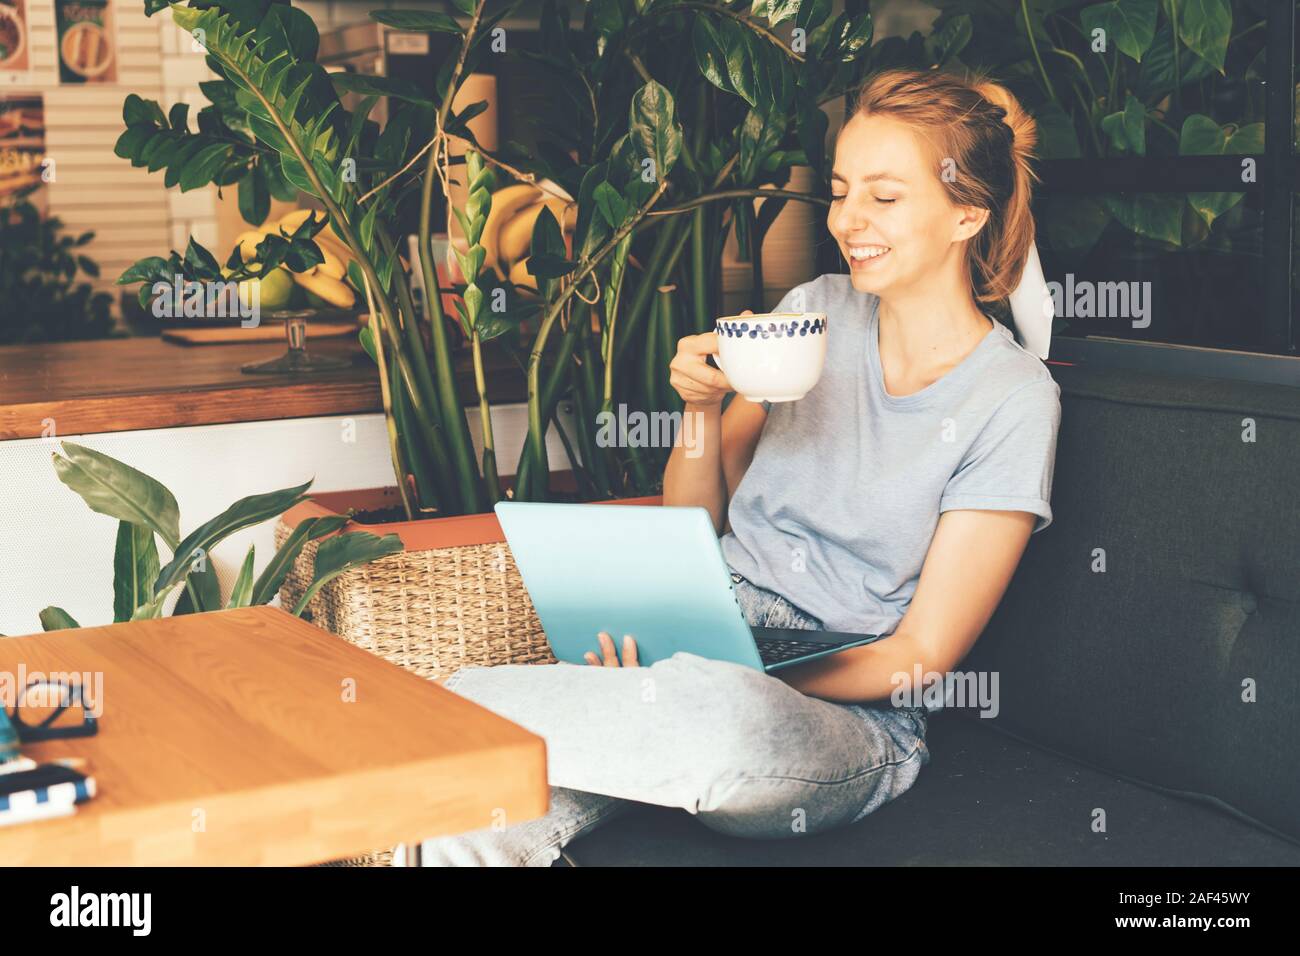 girl with a laptop drinks a drink and laughs Stock Photo